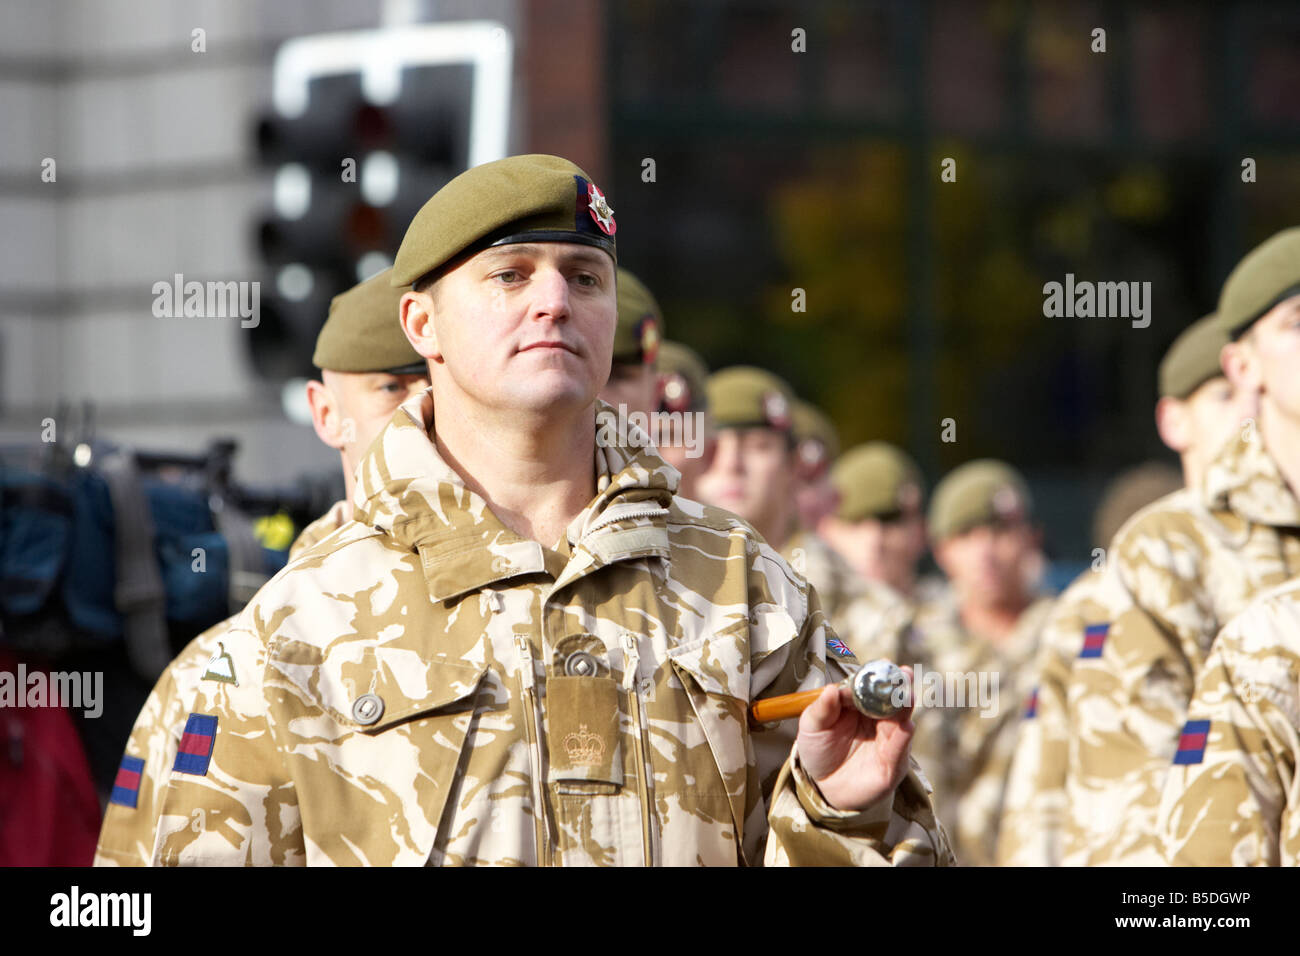 British Army major marching with members of the Royal Irish Regiment RIR parade at homecoming from Iraq and Afghanistan belfast Stock Photo